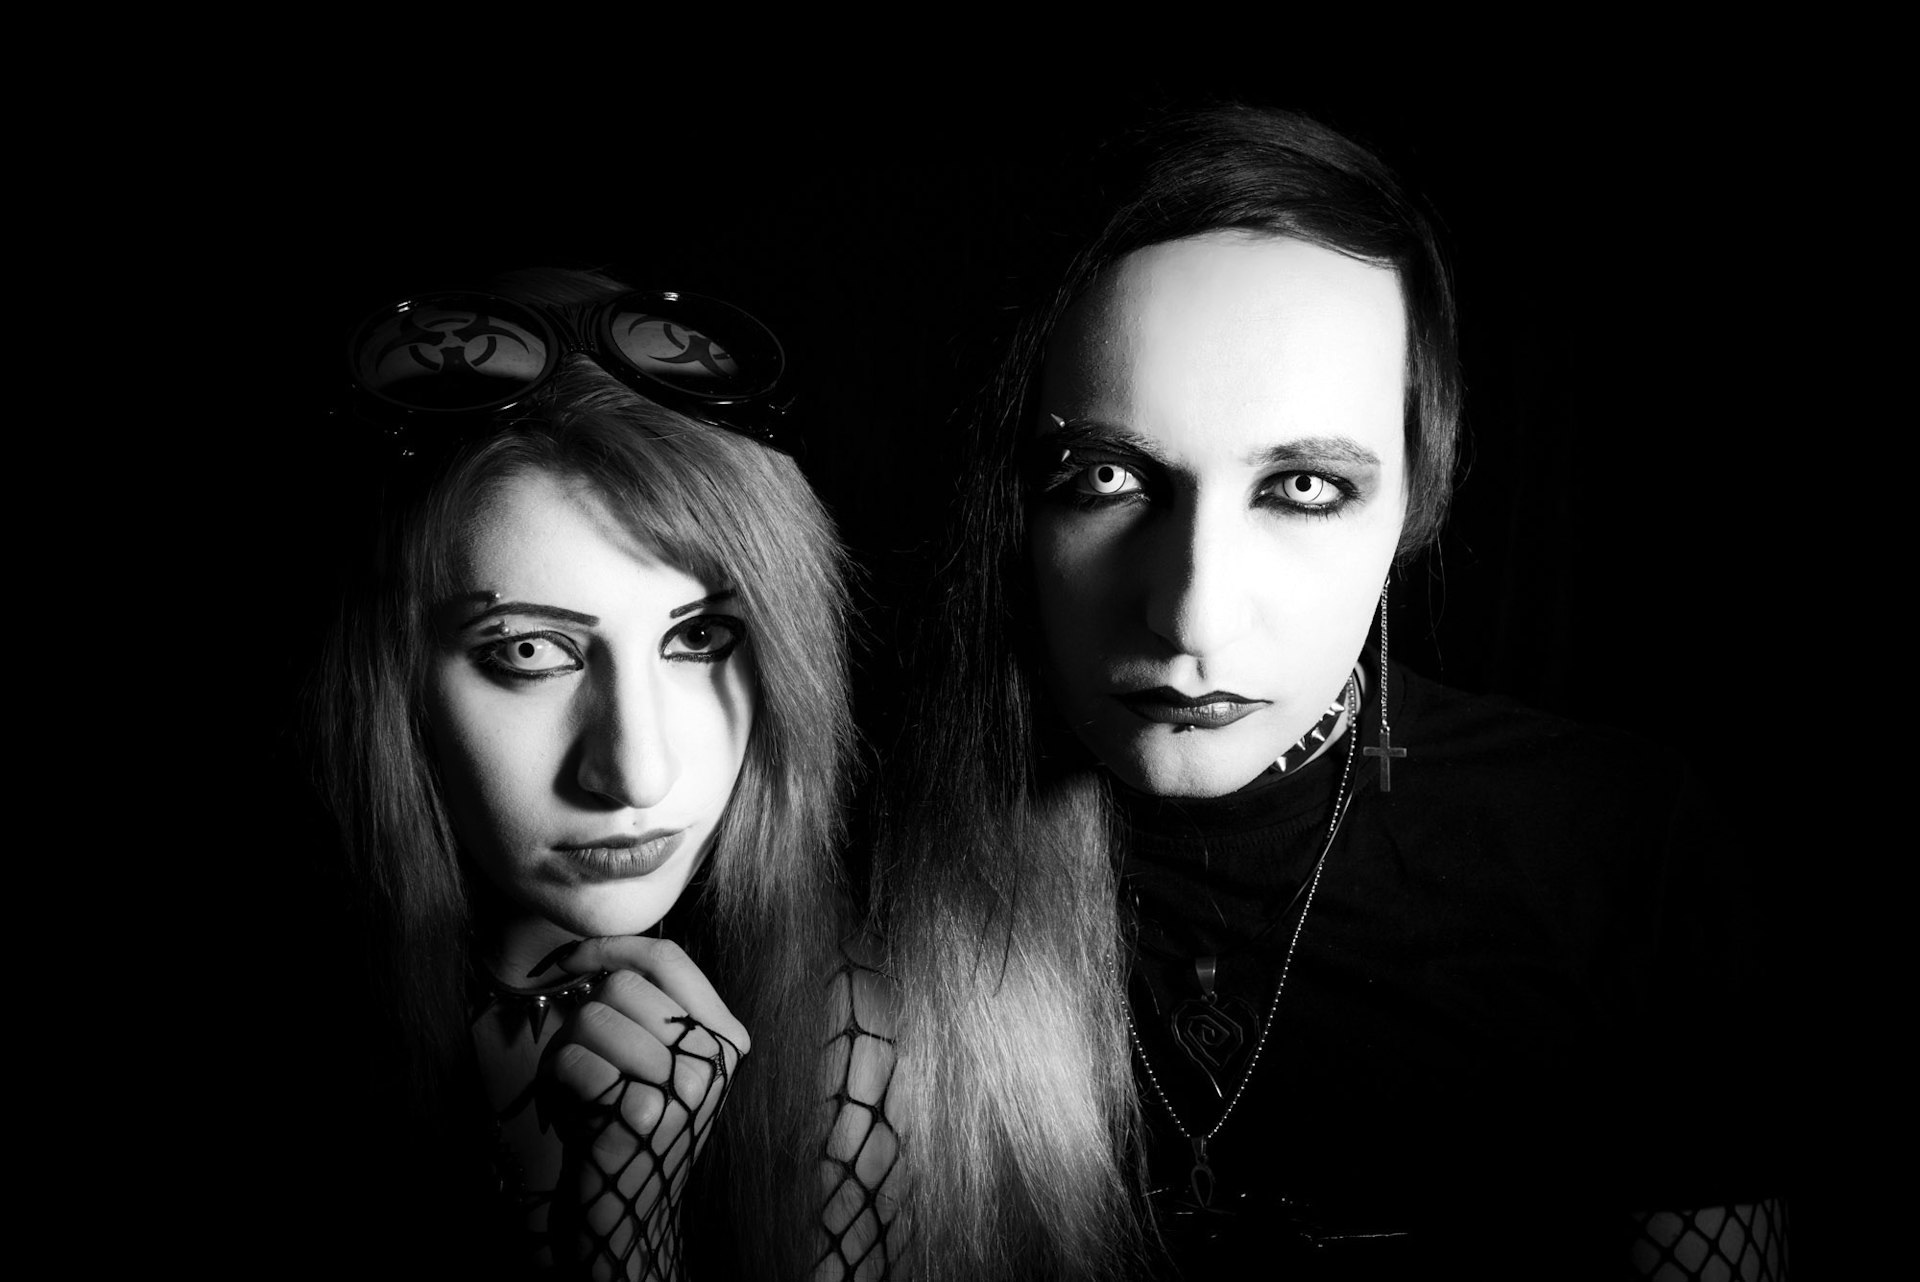 Bella and Sandro “Manson,” Georgia’s only gothic couple. Influenced by American musician Marilyn Manson, the couple plan to hold an event to markWorld Goth Day in Tbilisi on22 May 2016. “I hope it will contribute to the development of the Georgian Gothic music and subculture scene,”he says. 